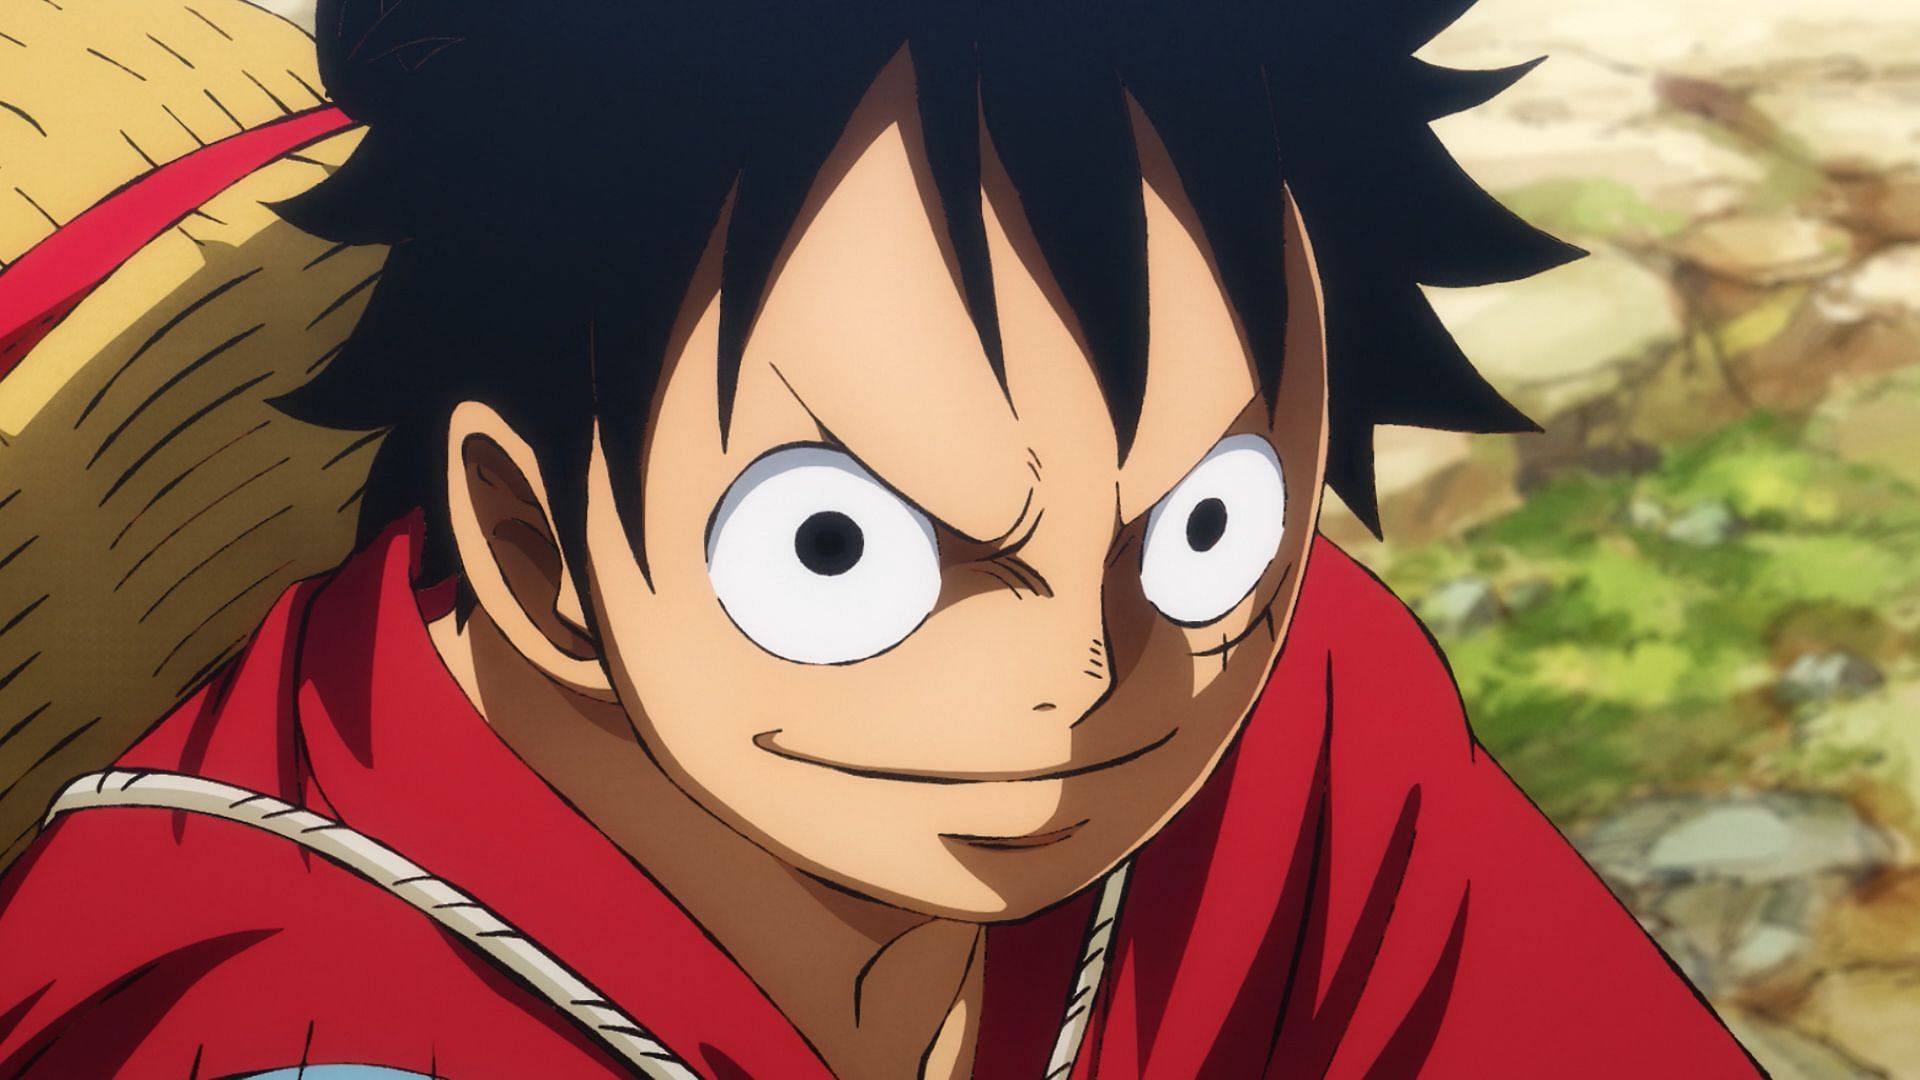 Luffy as seen in the series